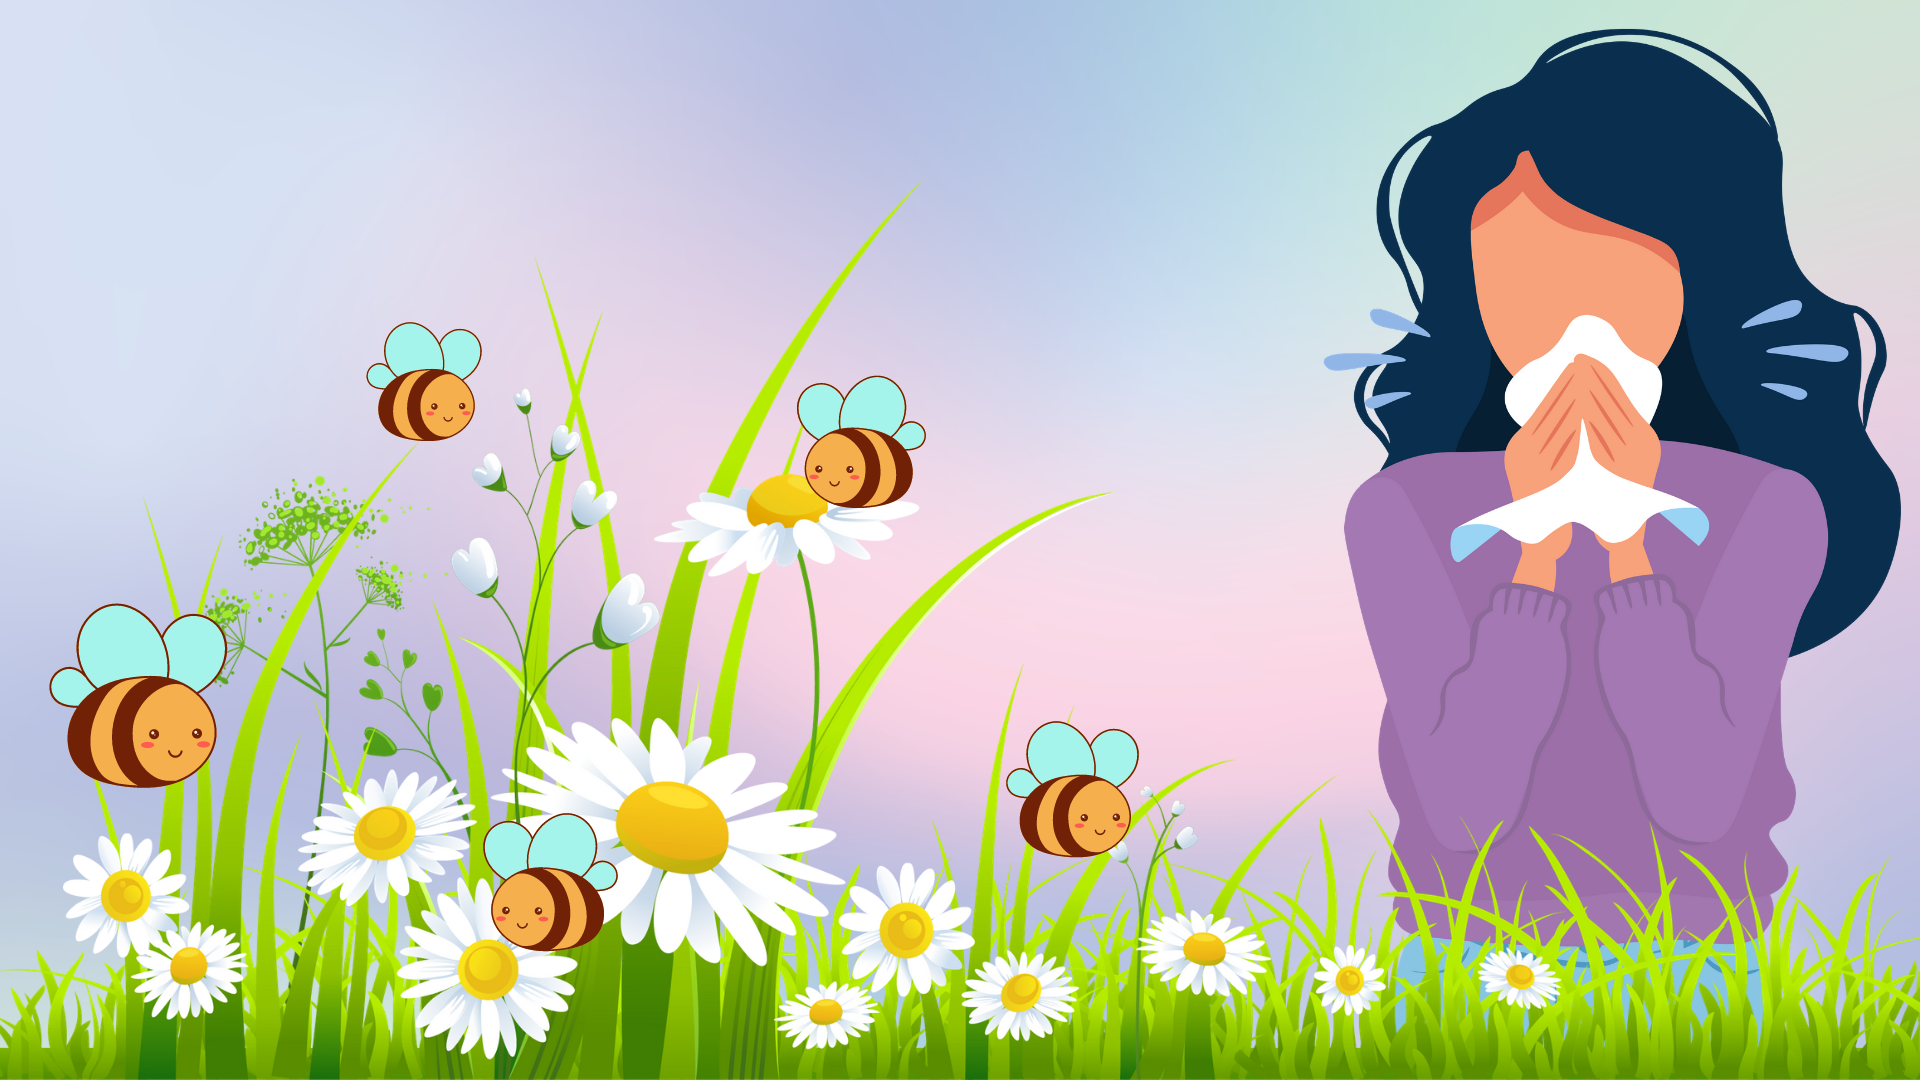 Woman sneezing in a field of flowers with bees